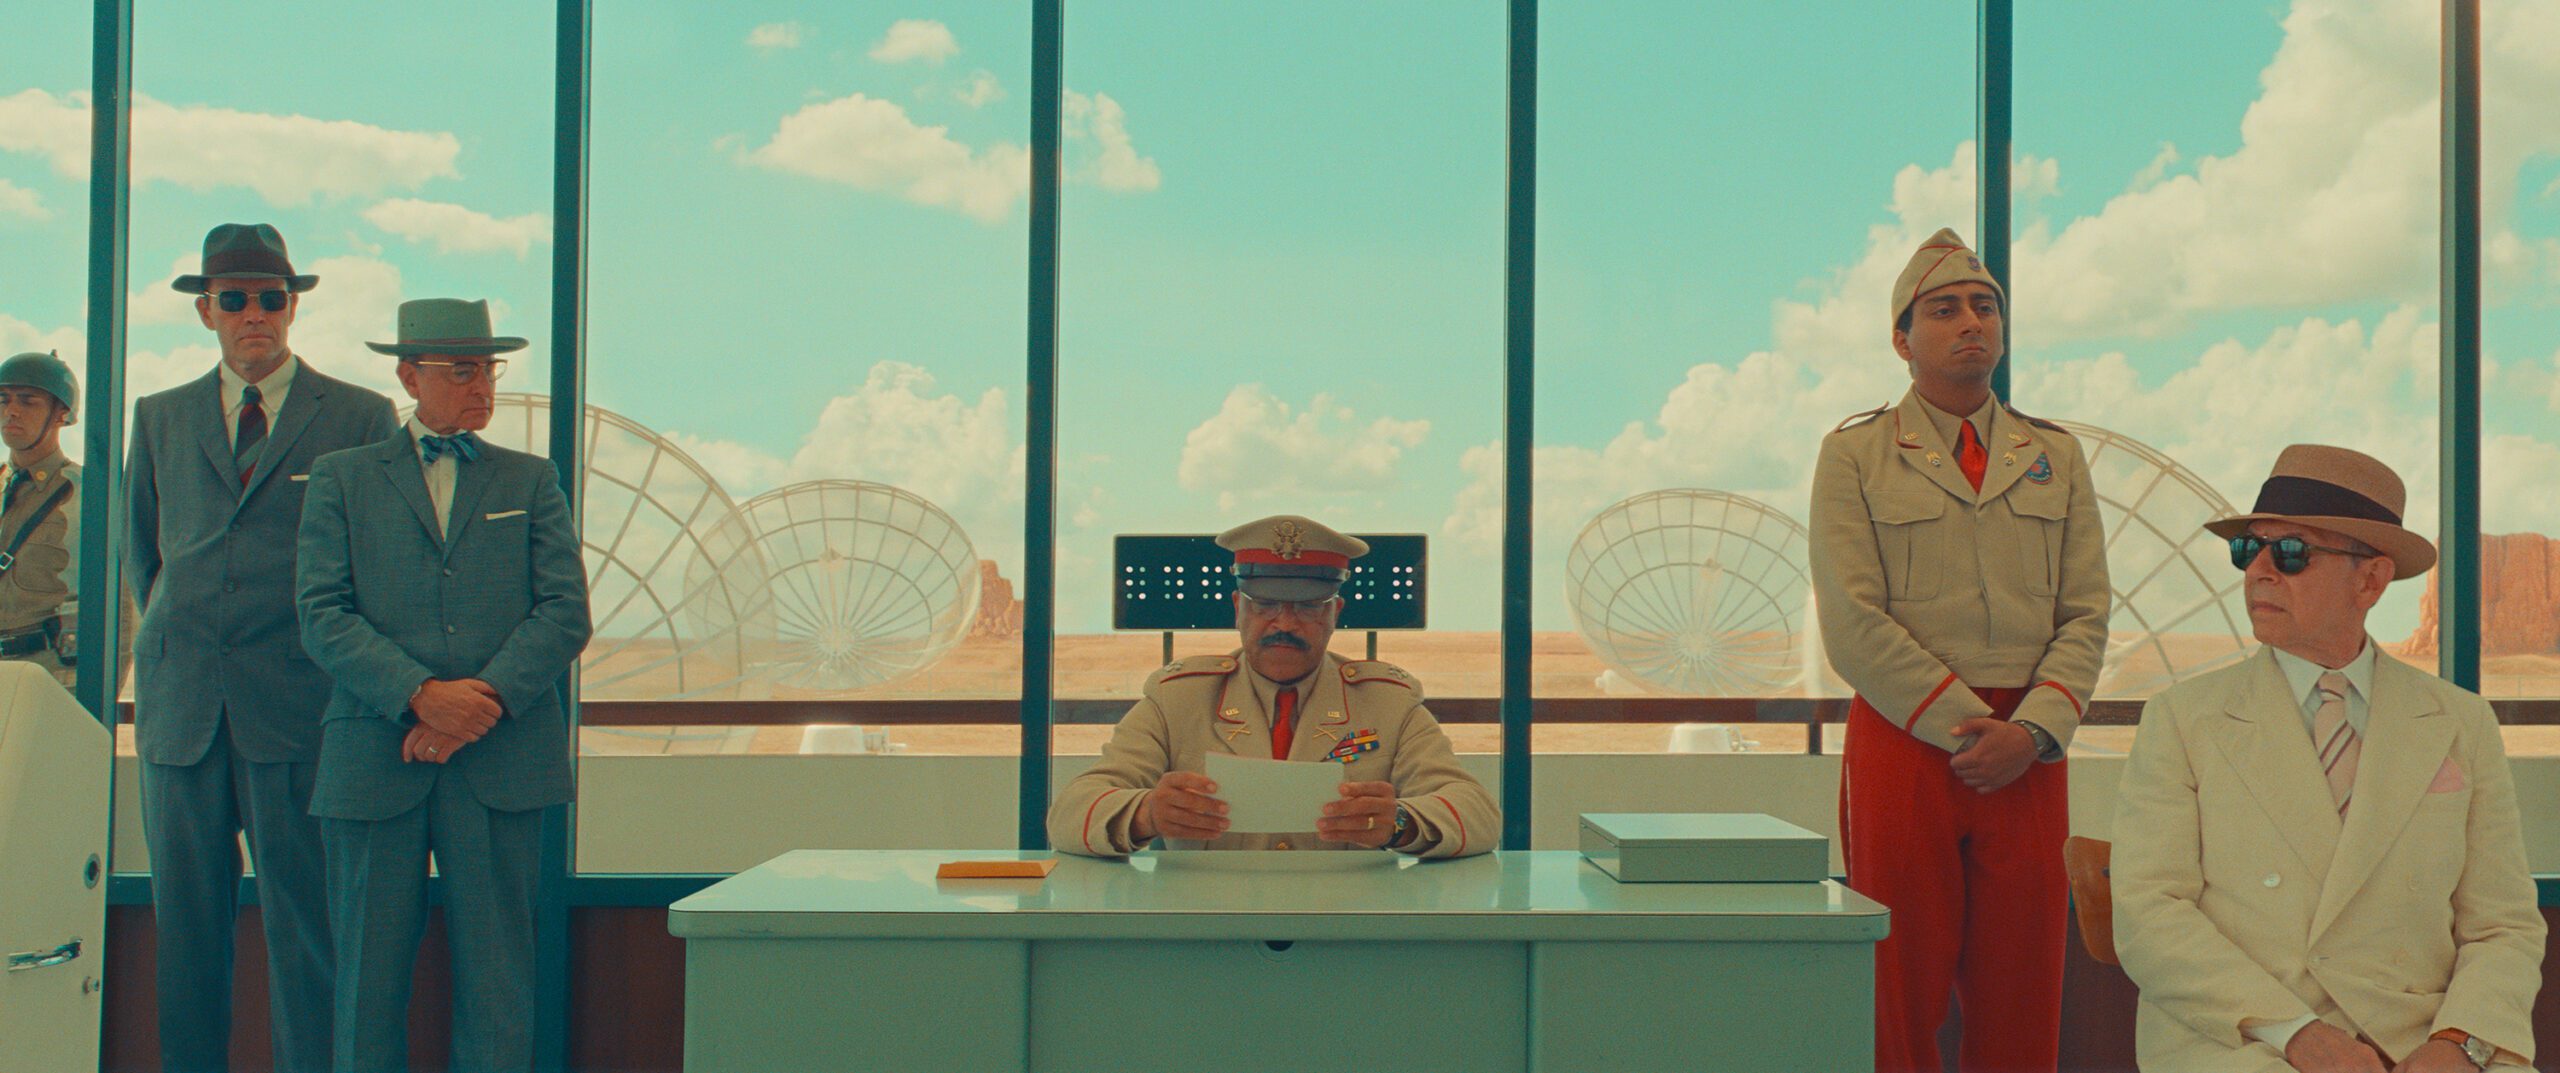 Meet the team that makes Wes Anderson movies look like Wes Anderson ...